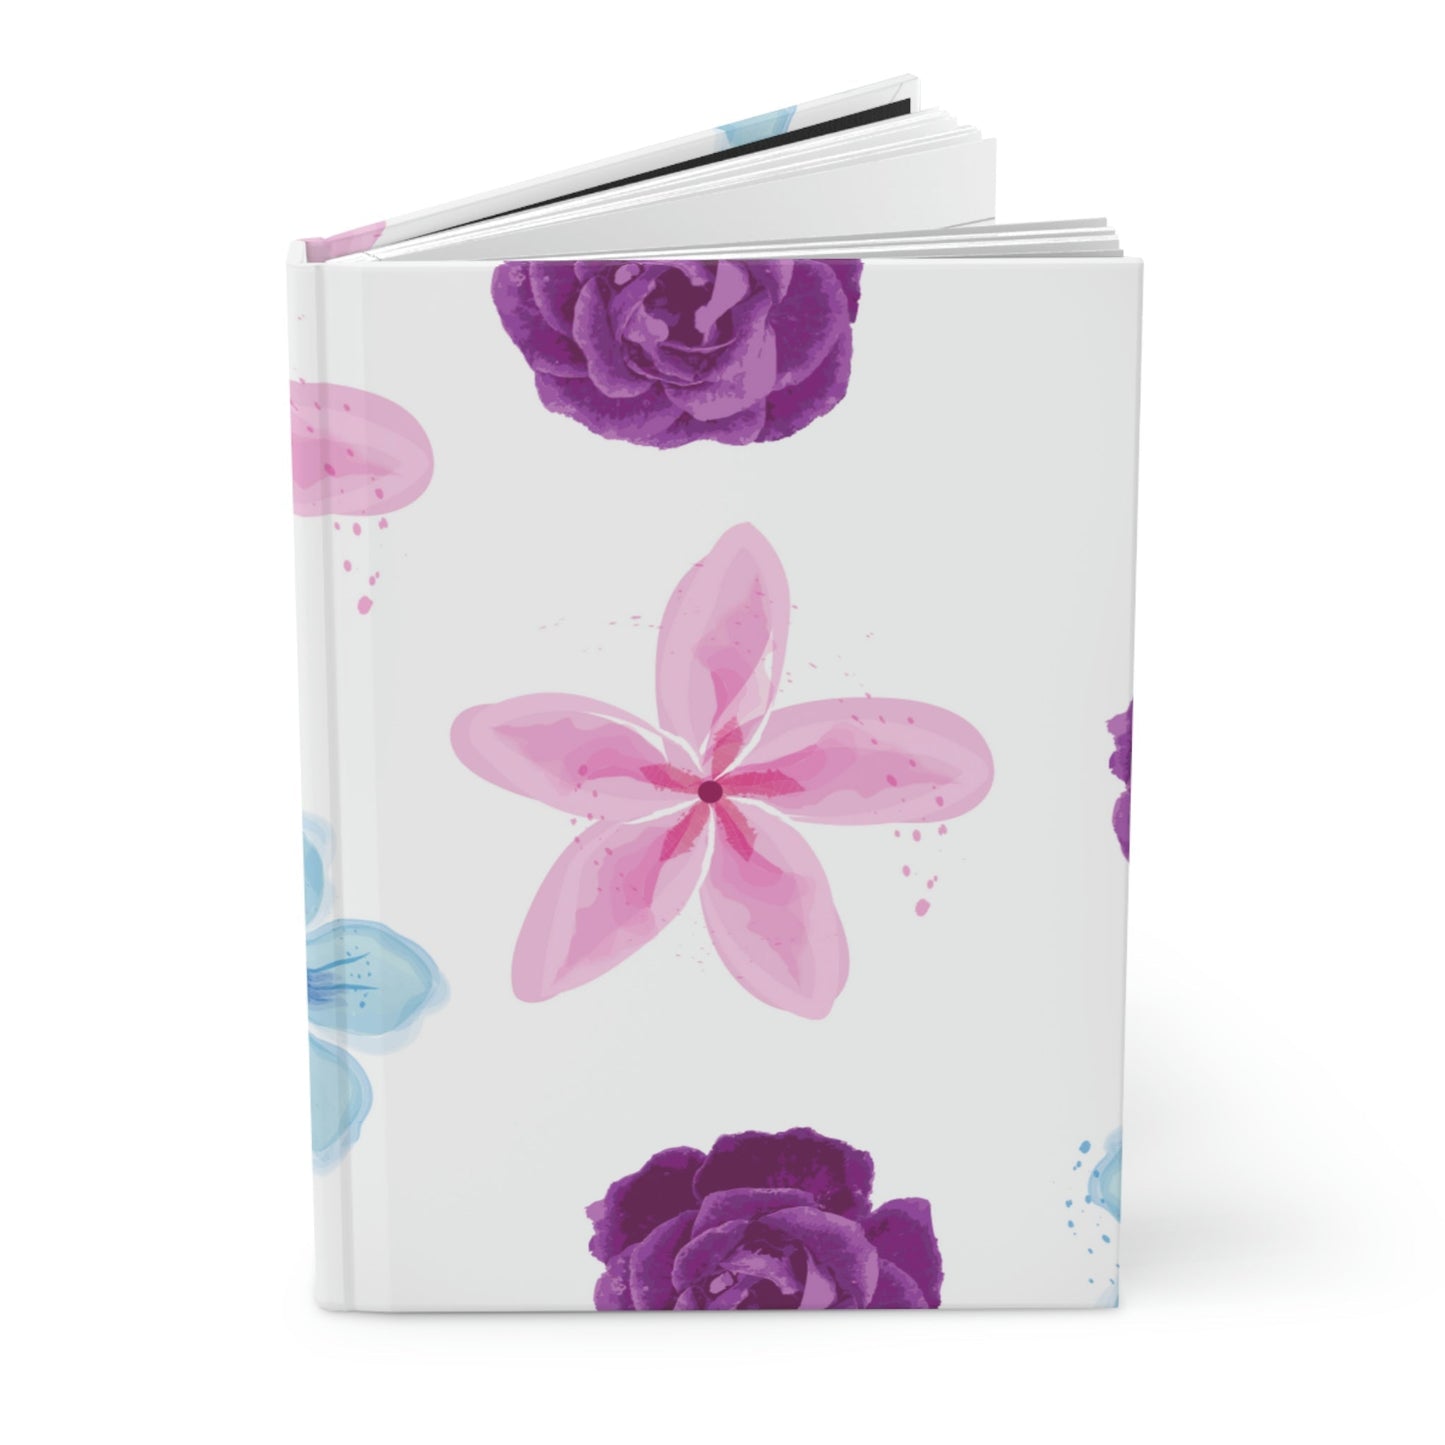 Pretty Florals Hardcover Matte Journal Paper products Pink Sweetheart